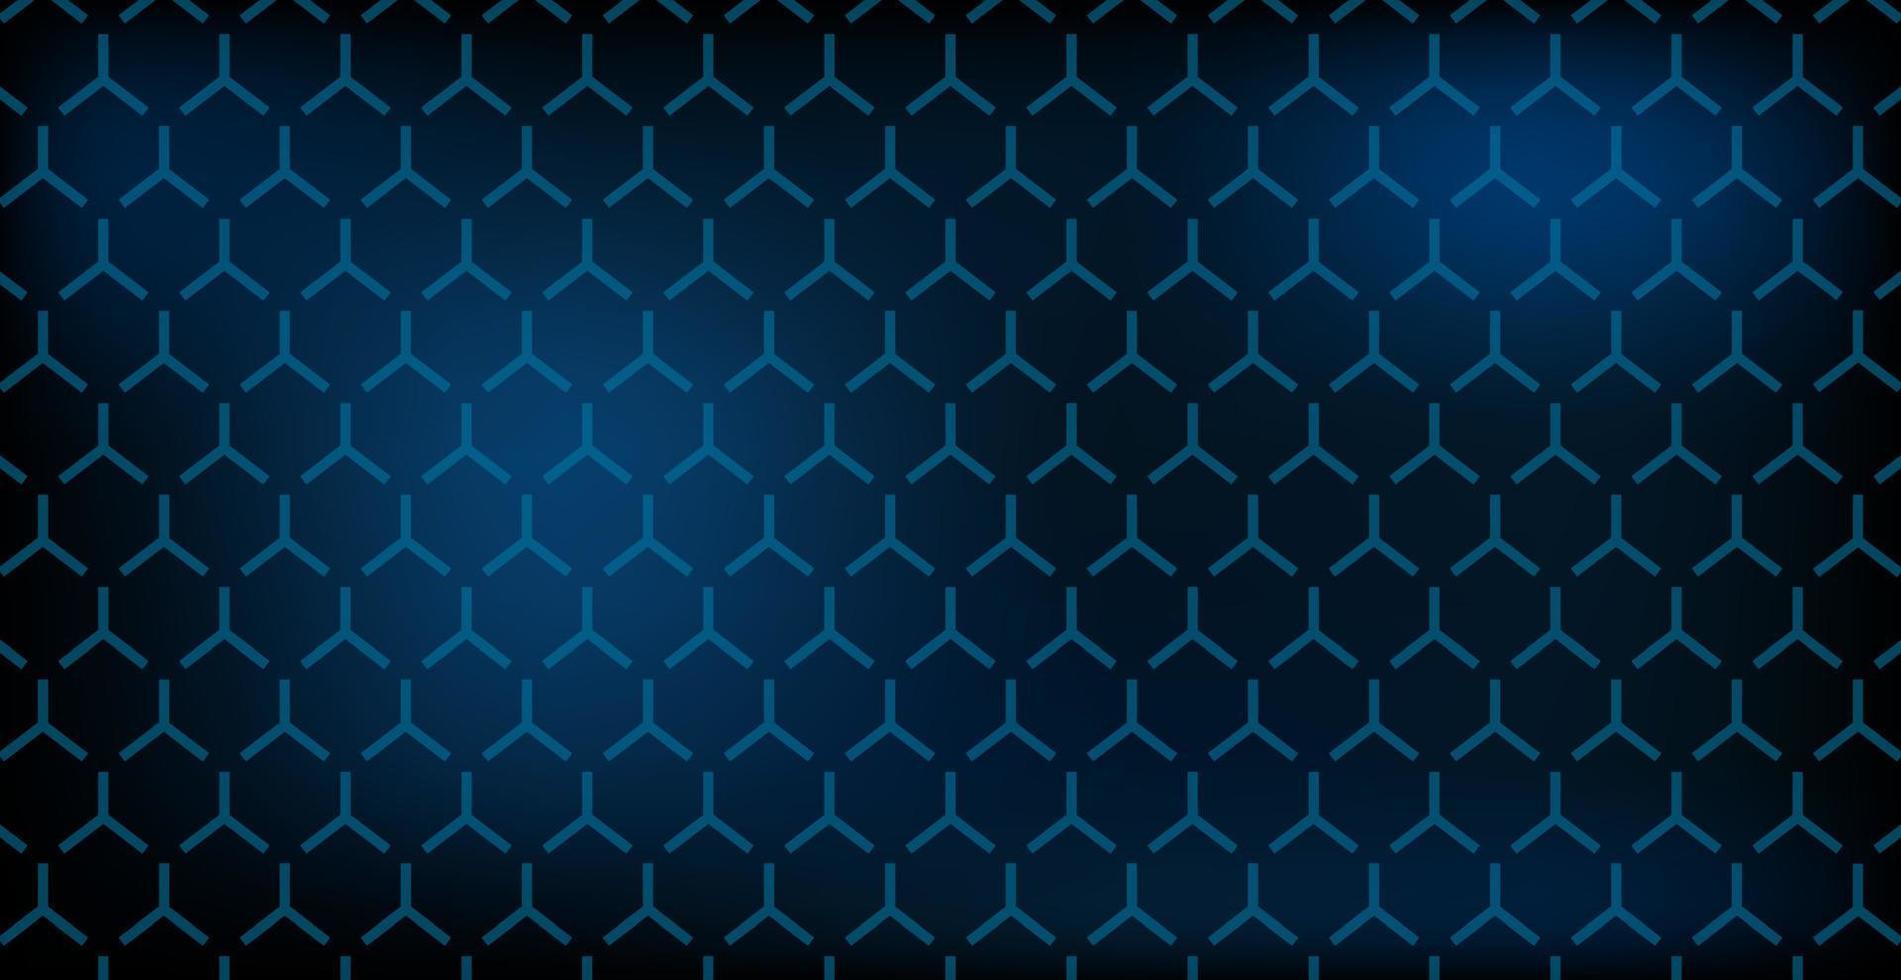 cyber space background pattern simple minimalist vector eps